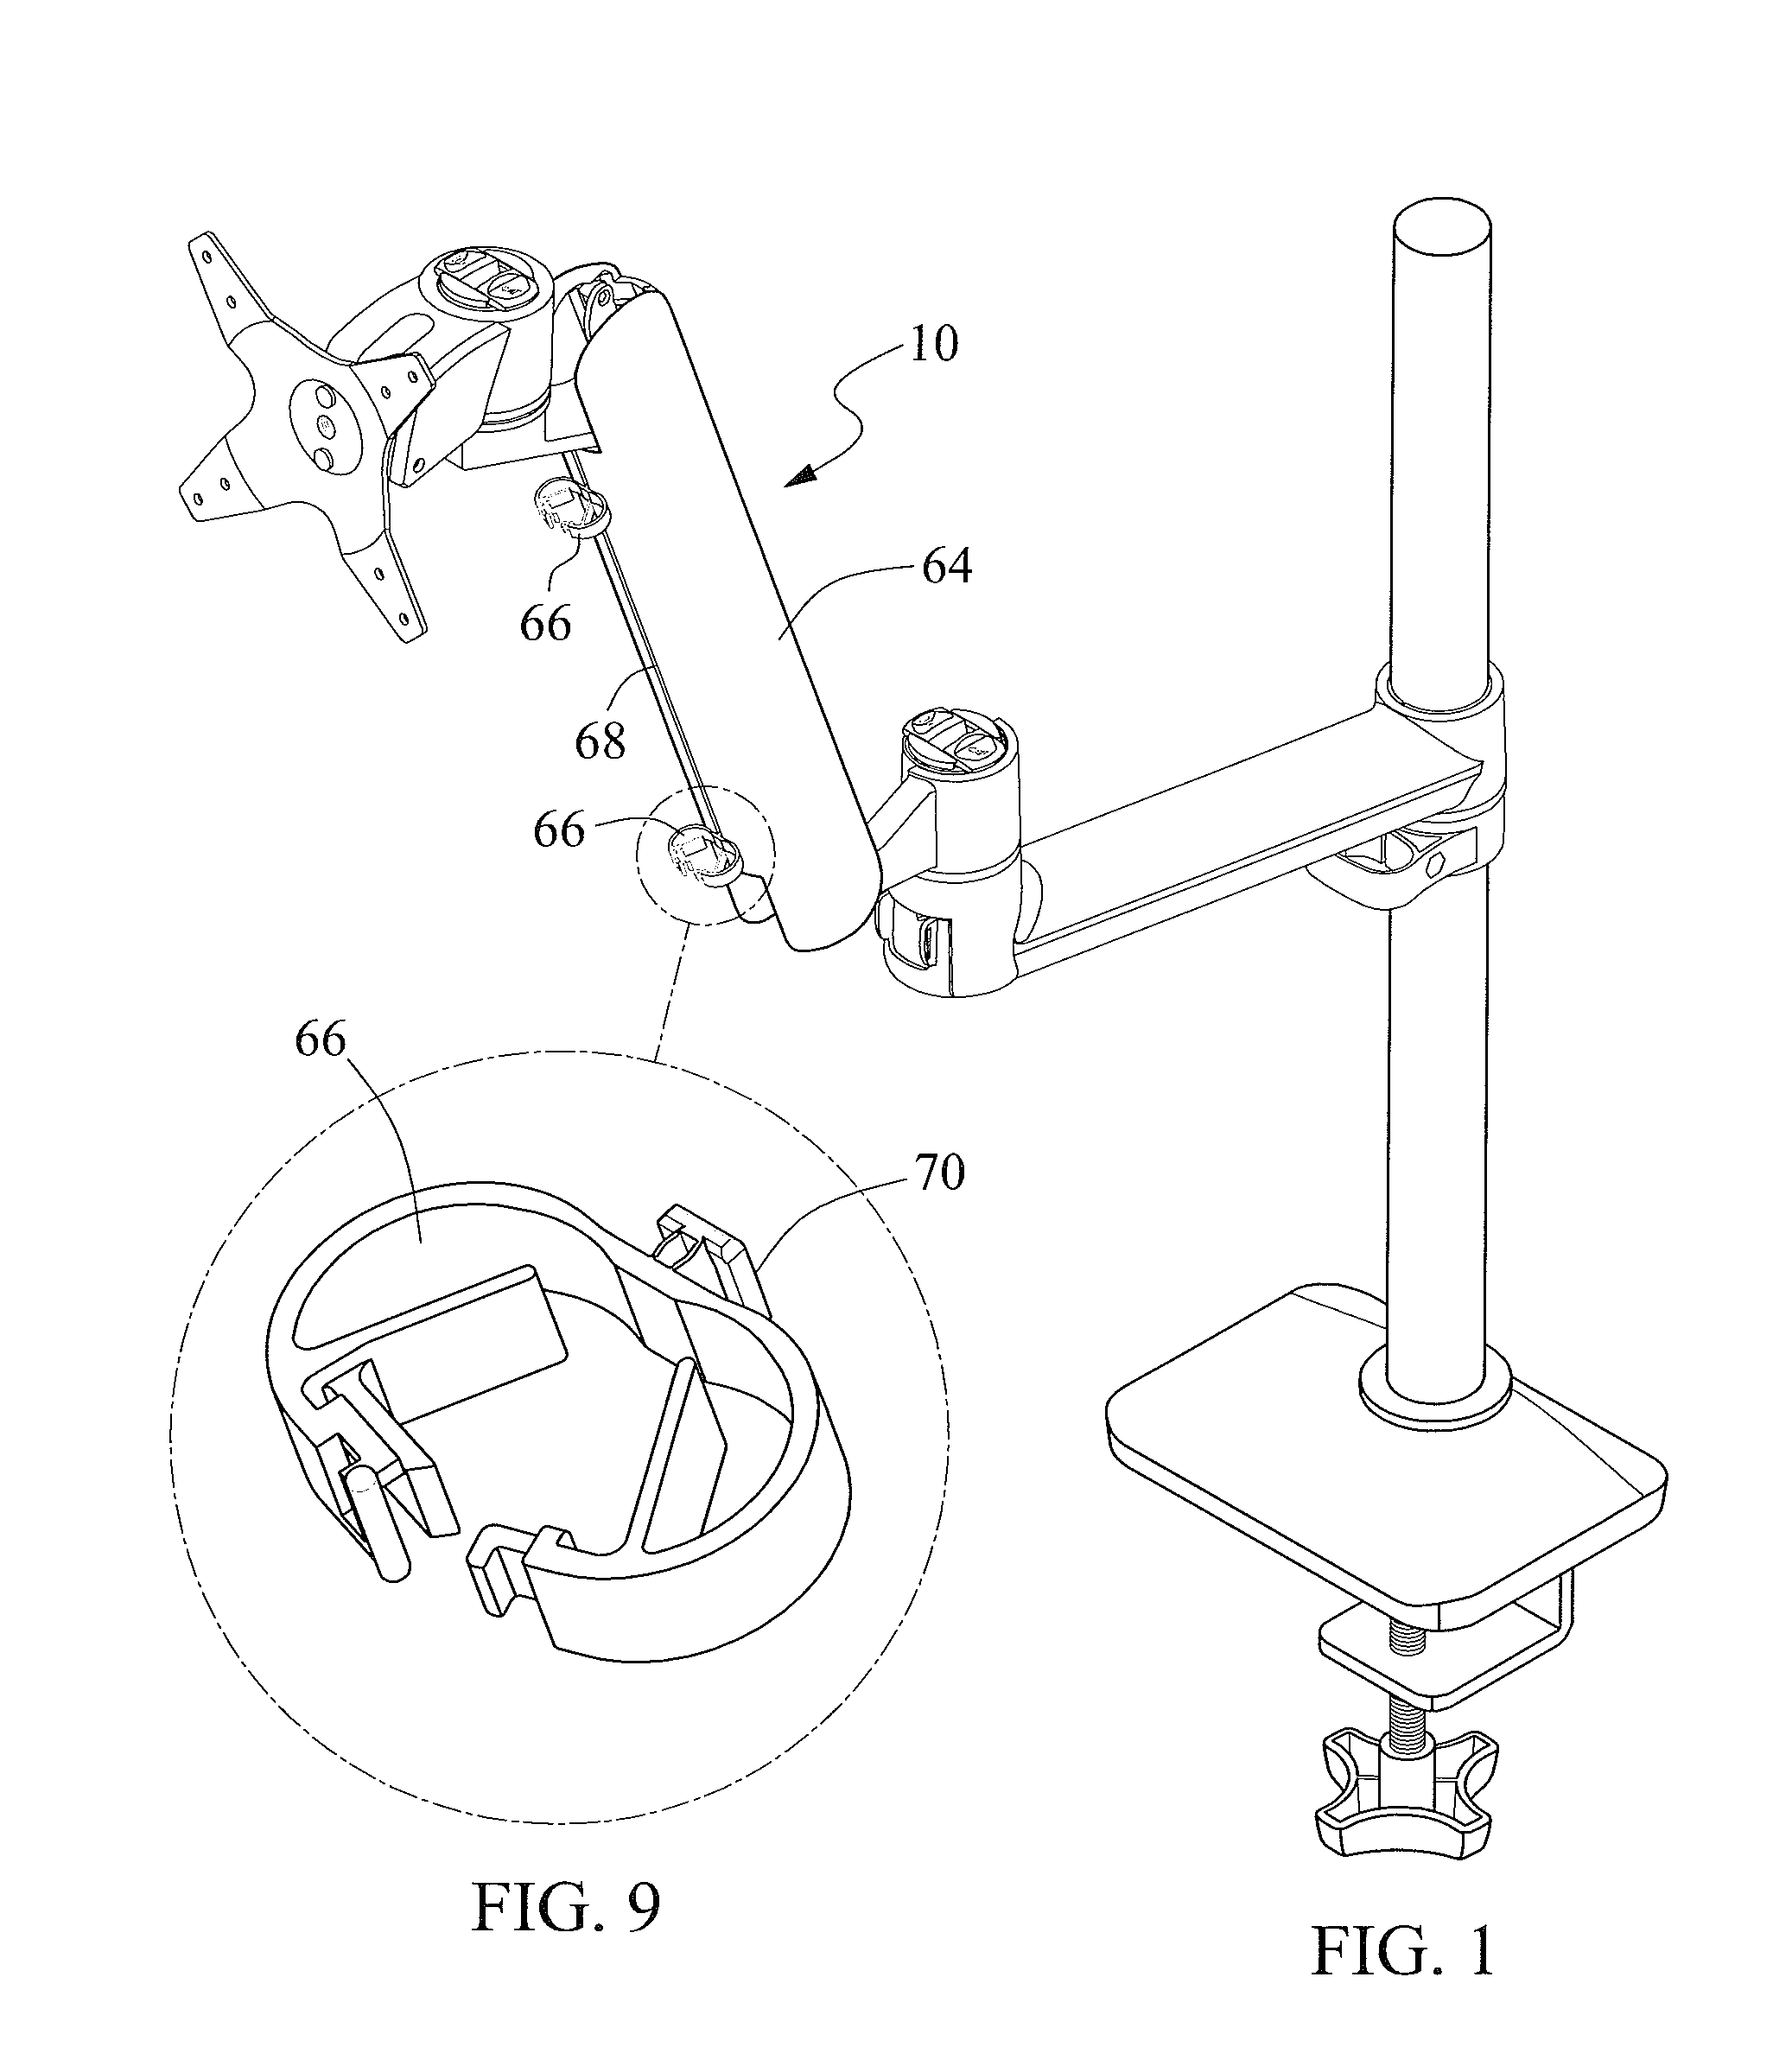 Load Supporting Apparatus